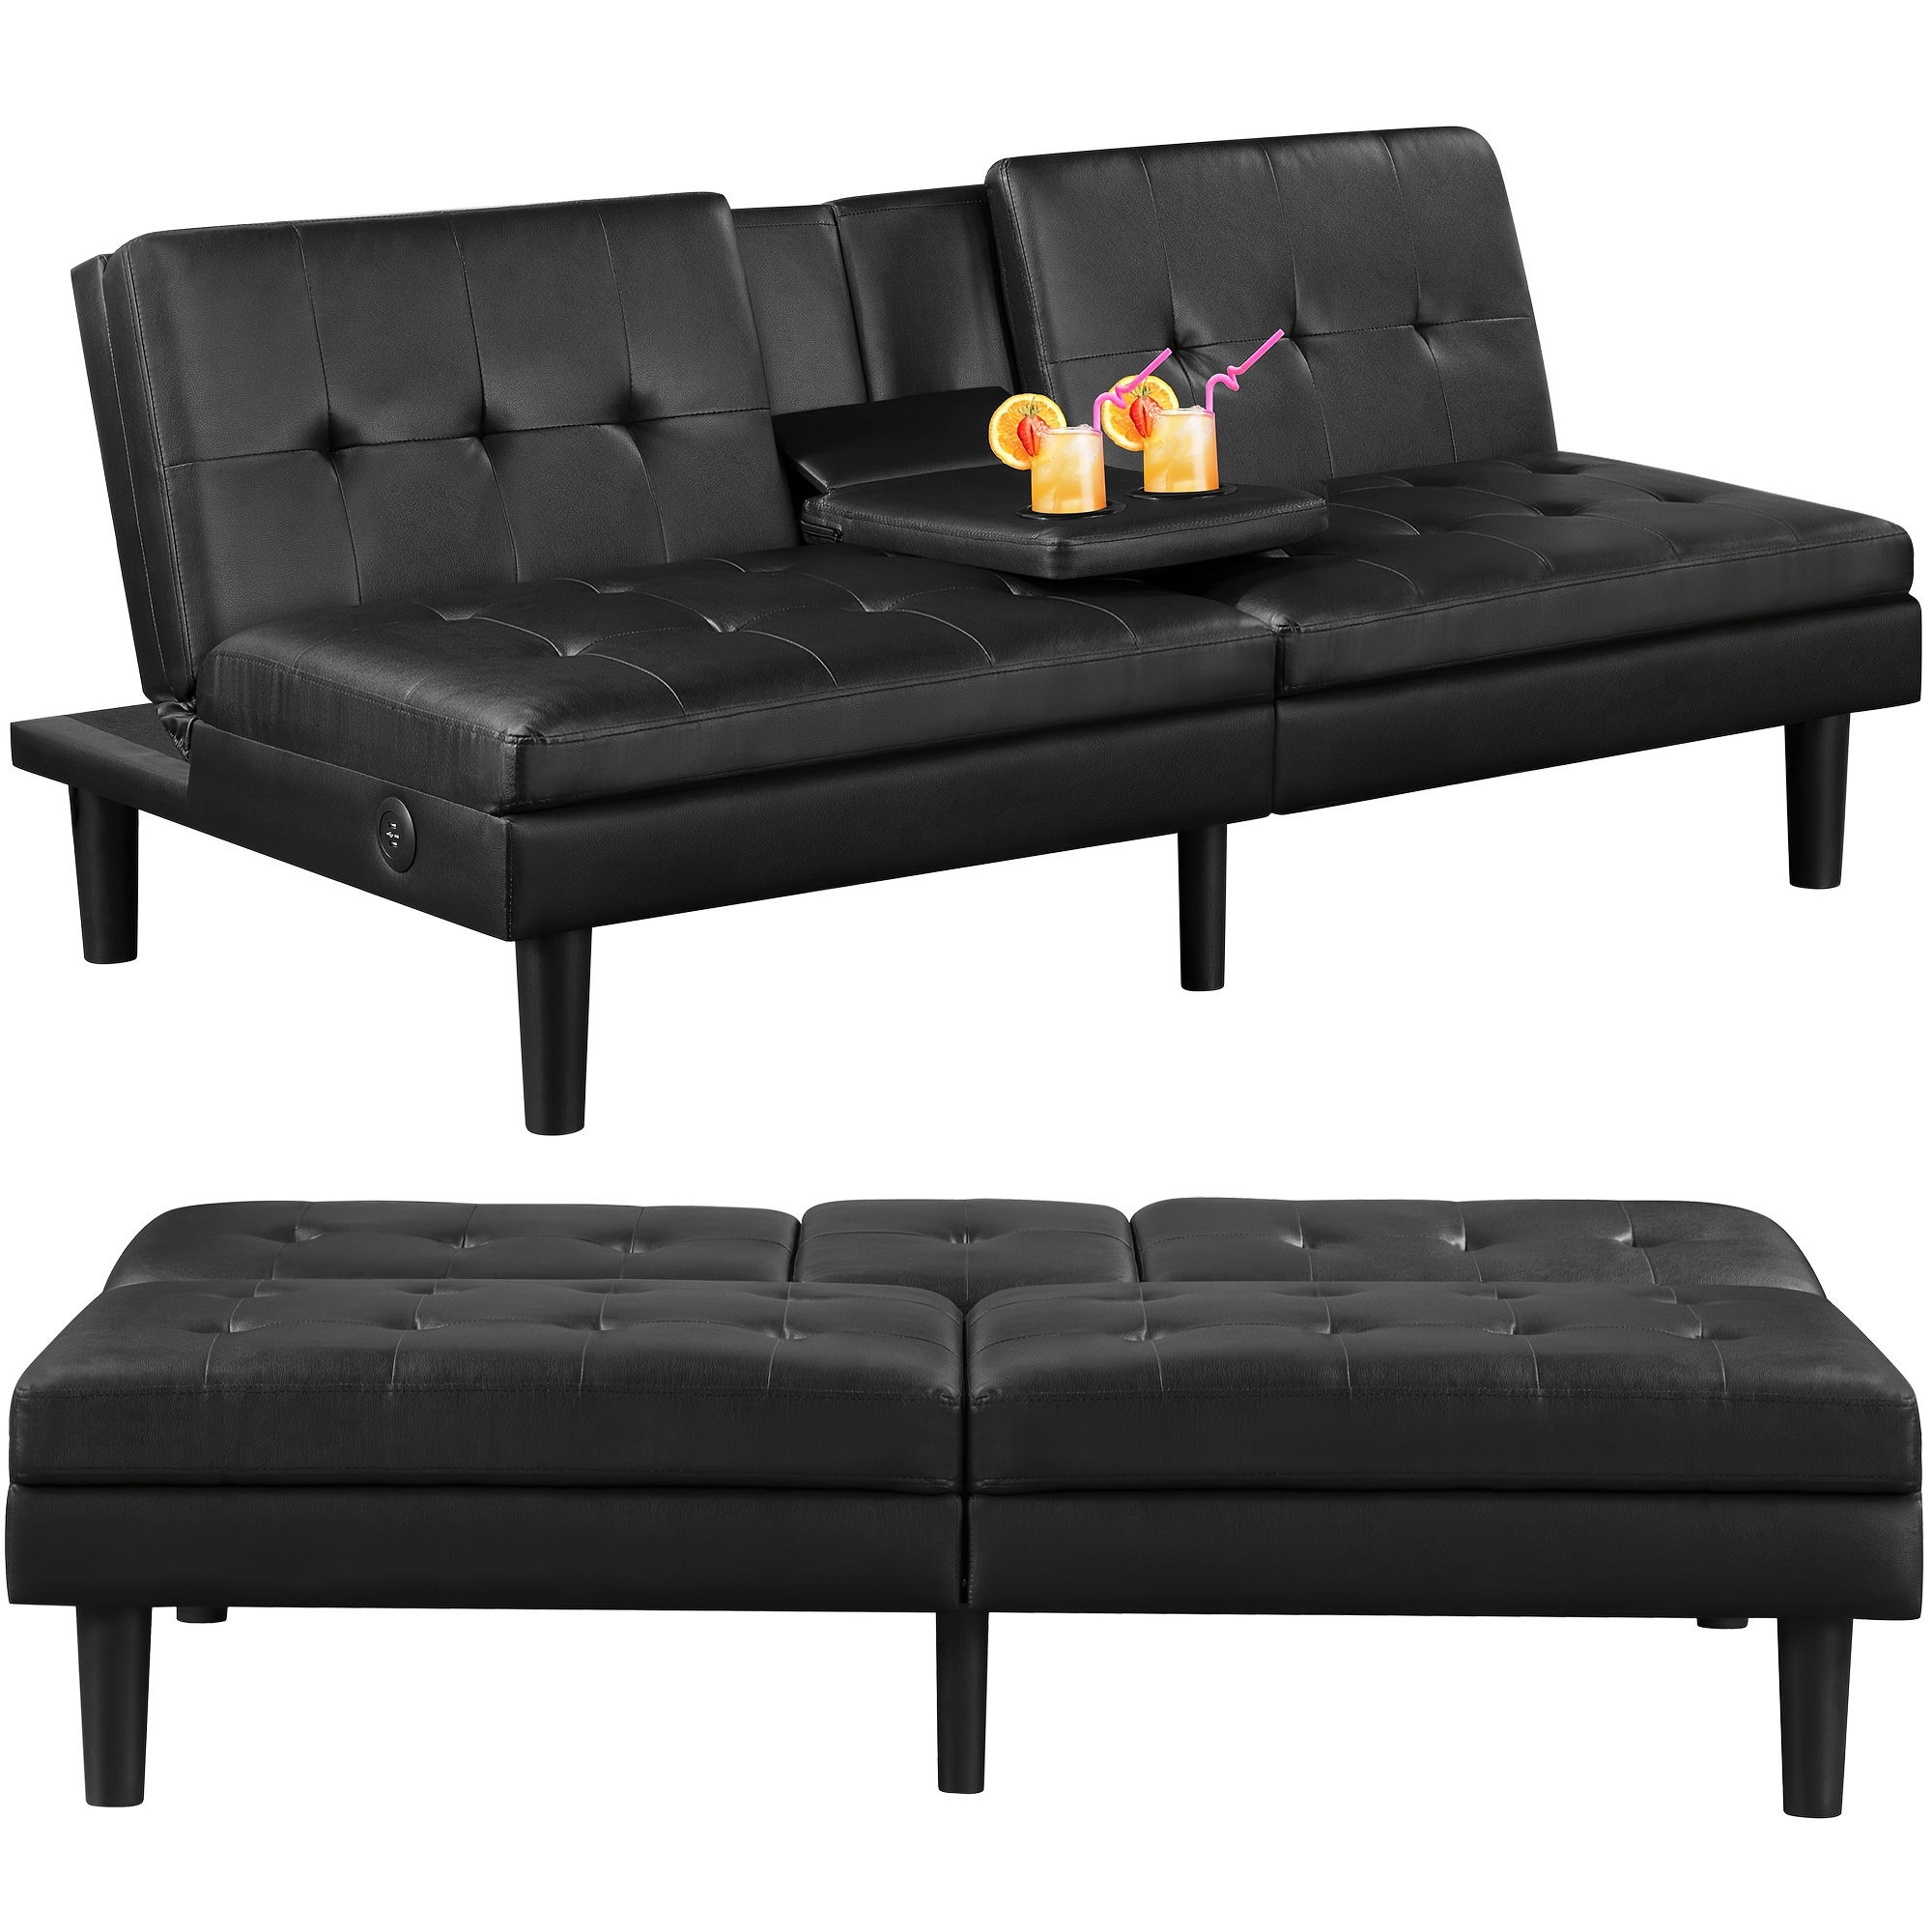 

Futon Sofa Bed Modern Folding Sofa Couch With 2 Cup Holders, Usb Port, Faux Leather Convertible Recliner For Living Room